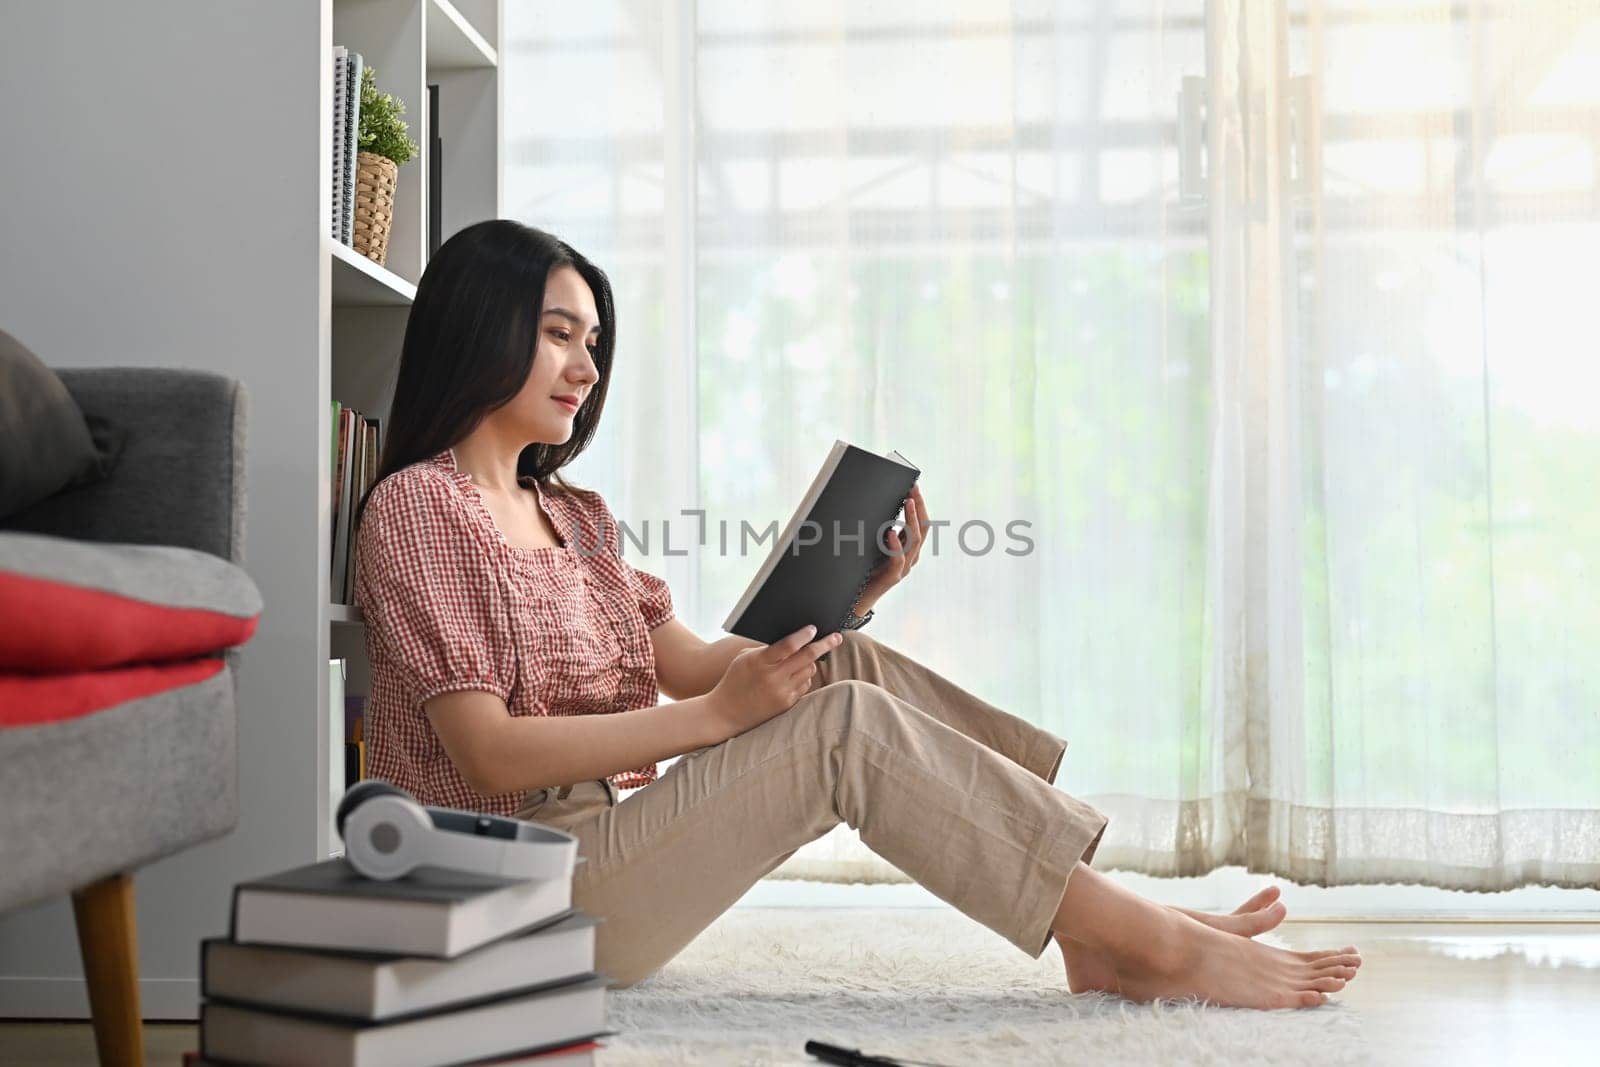 Beautiful woman sitting floor in living room and reading a book, spending leisure weekend time at home.